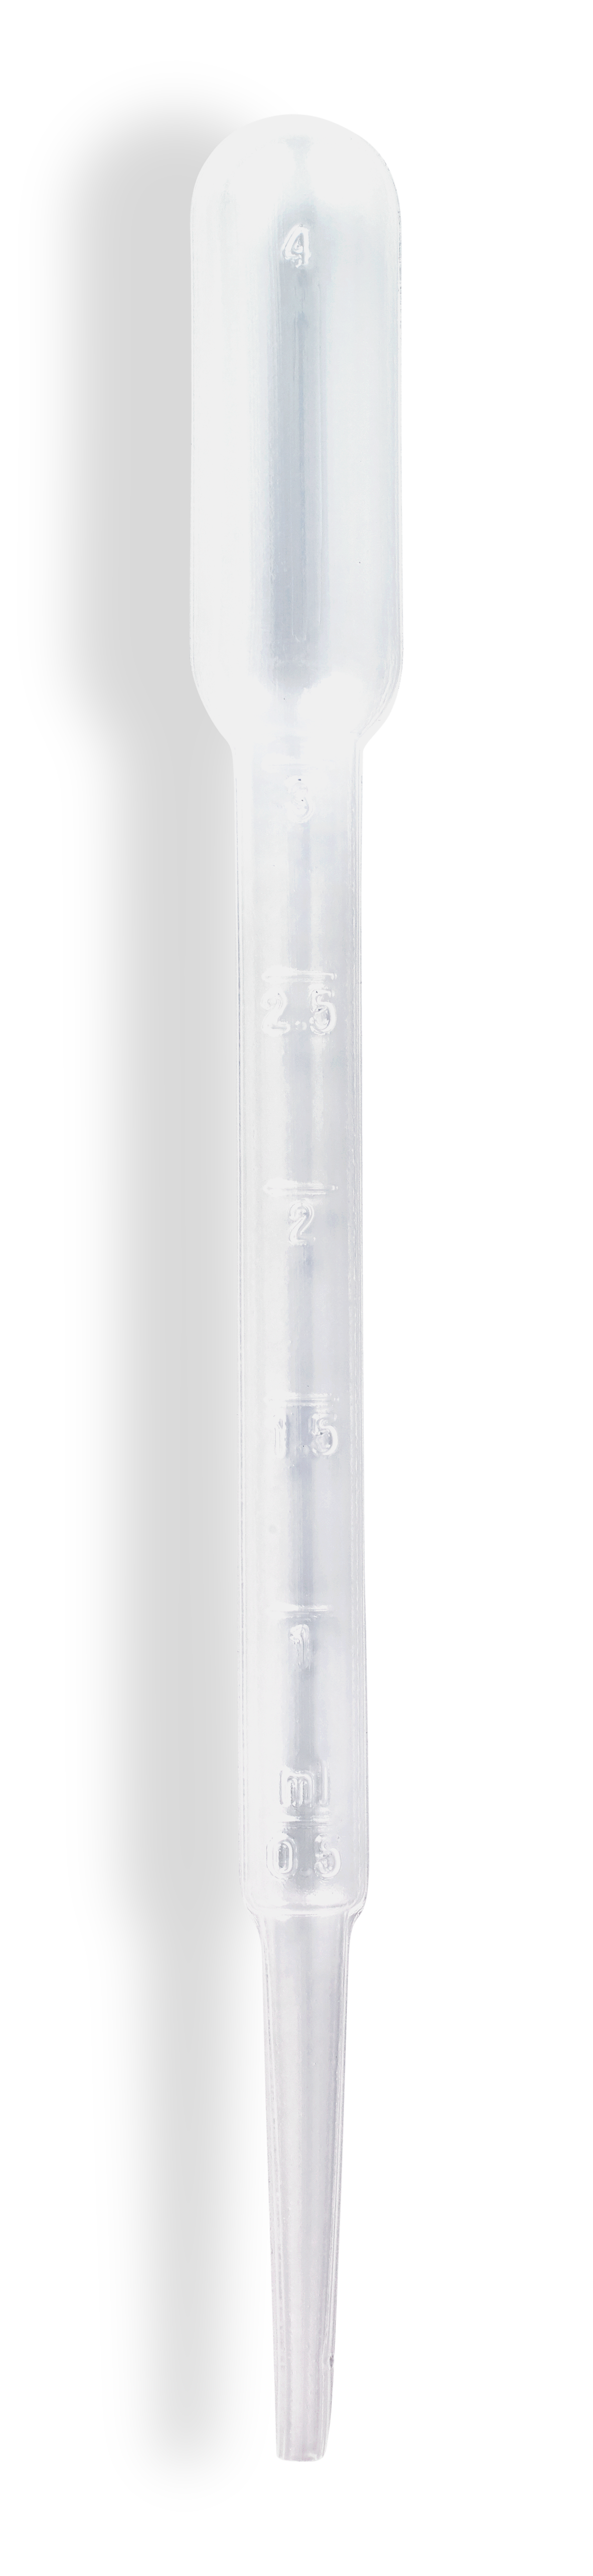 Disposable Transfer Pipets 200C | COPAN